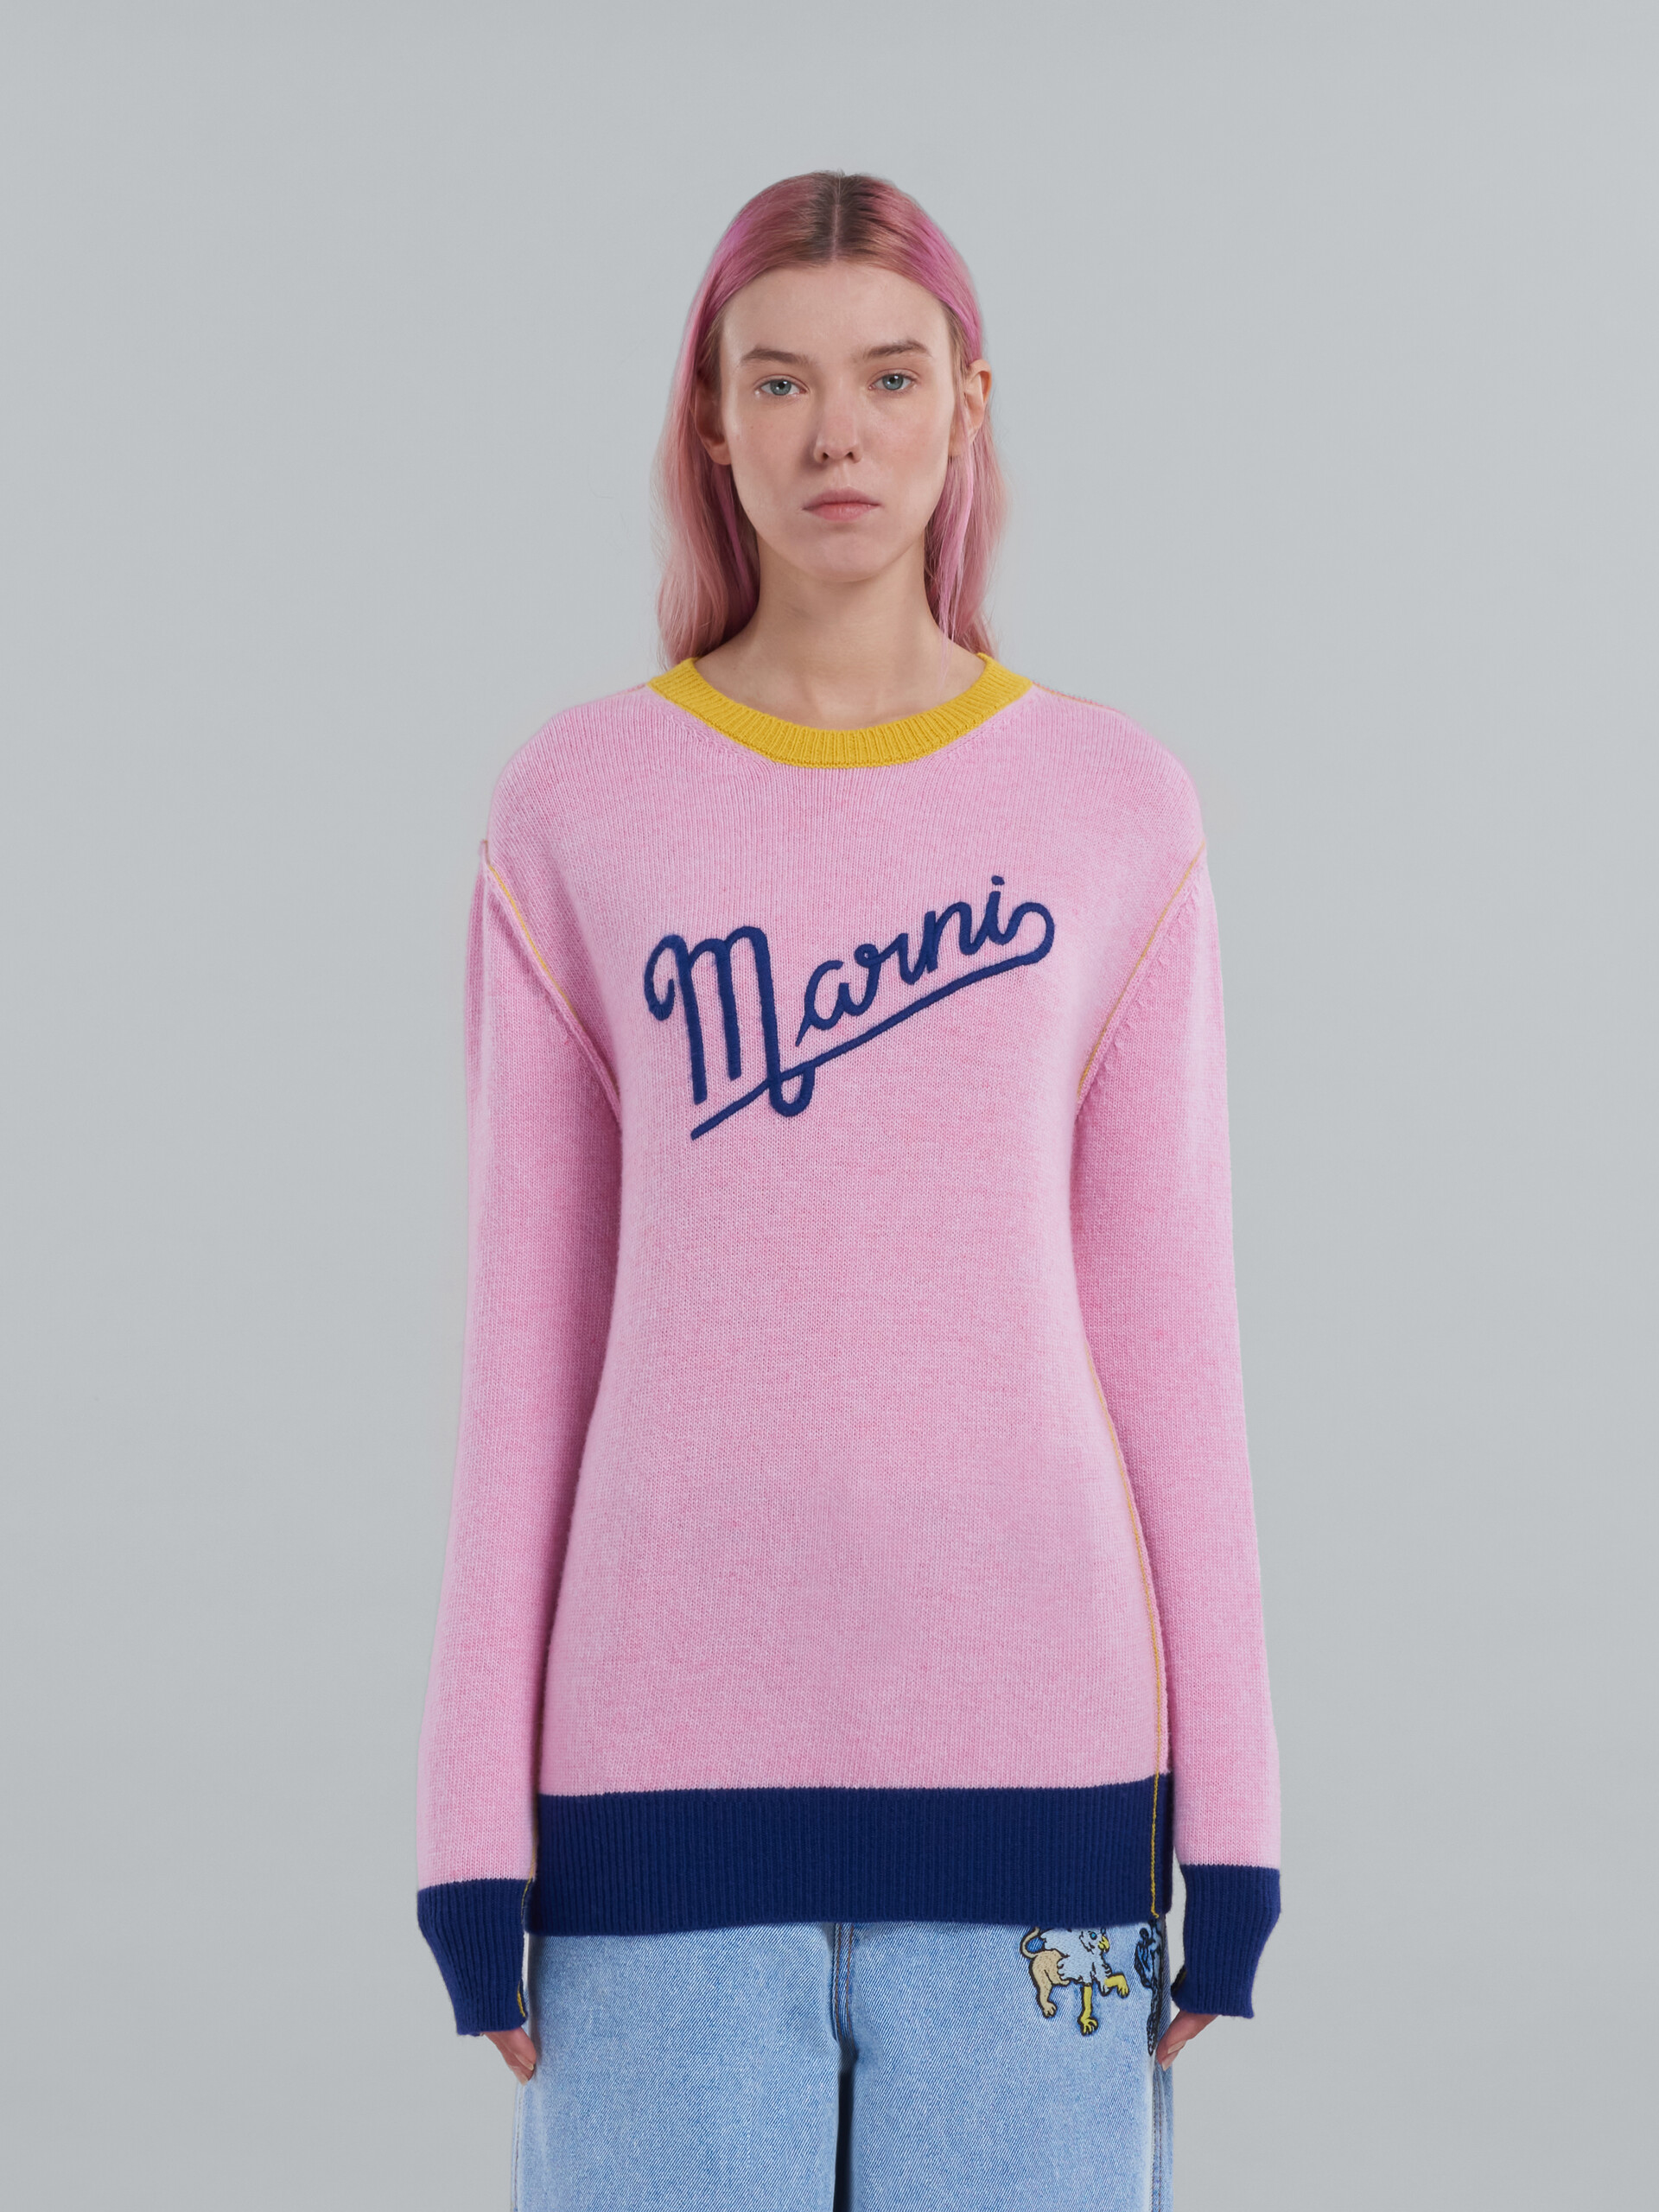 Pink wool sweater with logo - Pullovers - Image 2